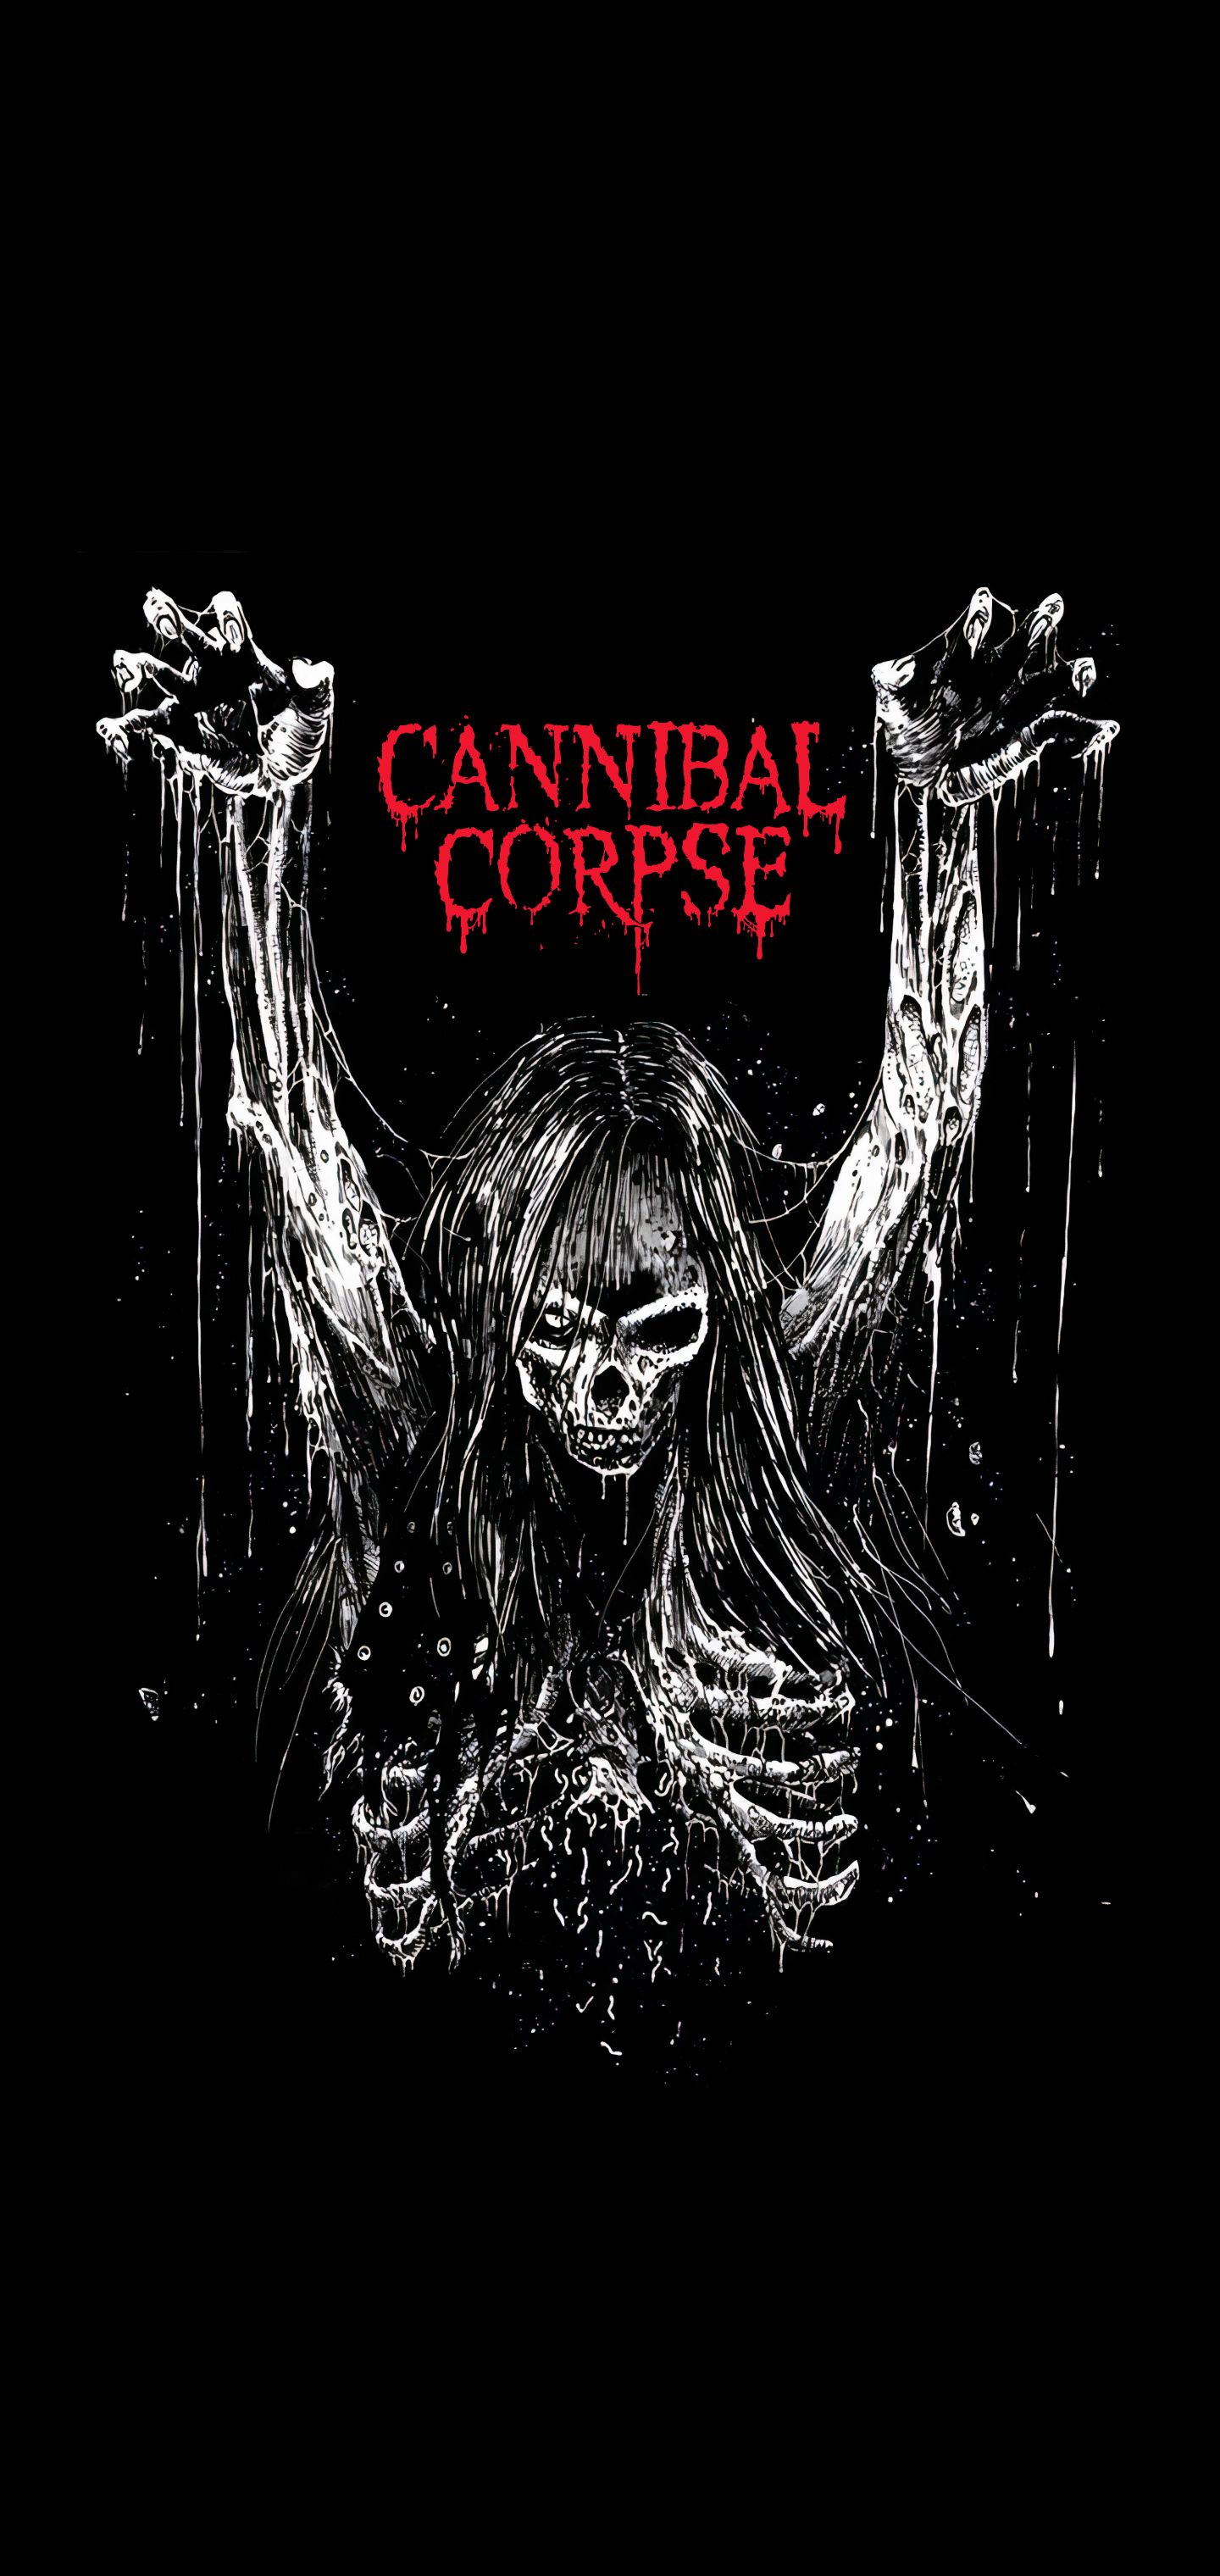 cannibal corpse, music, death metal 2160p